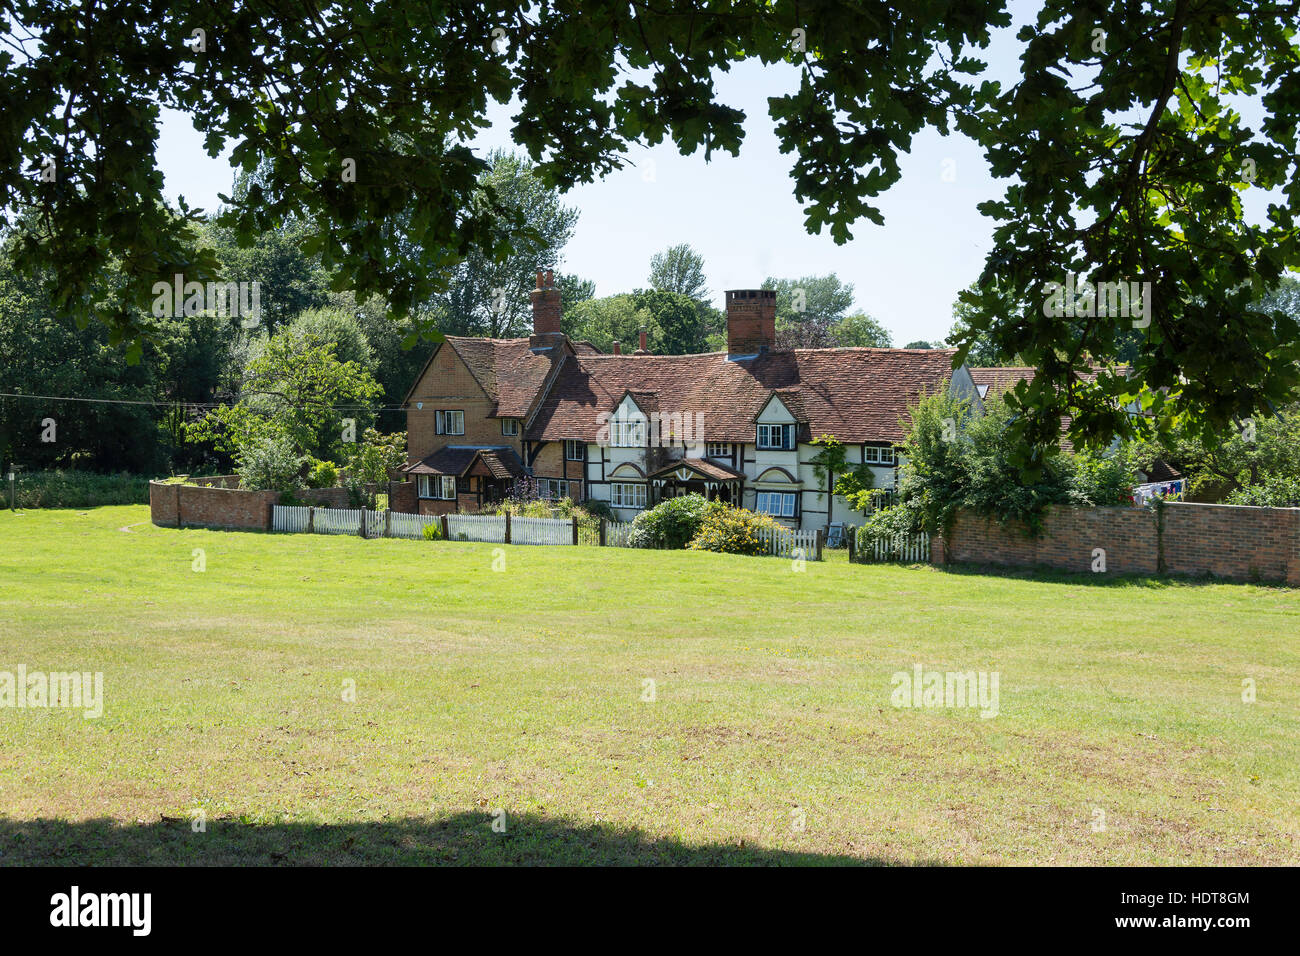 Period cottages on Perry Hill, Worplesdon, Surrey, England, United Kingdom Stock Photo